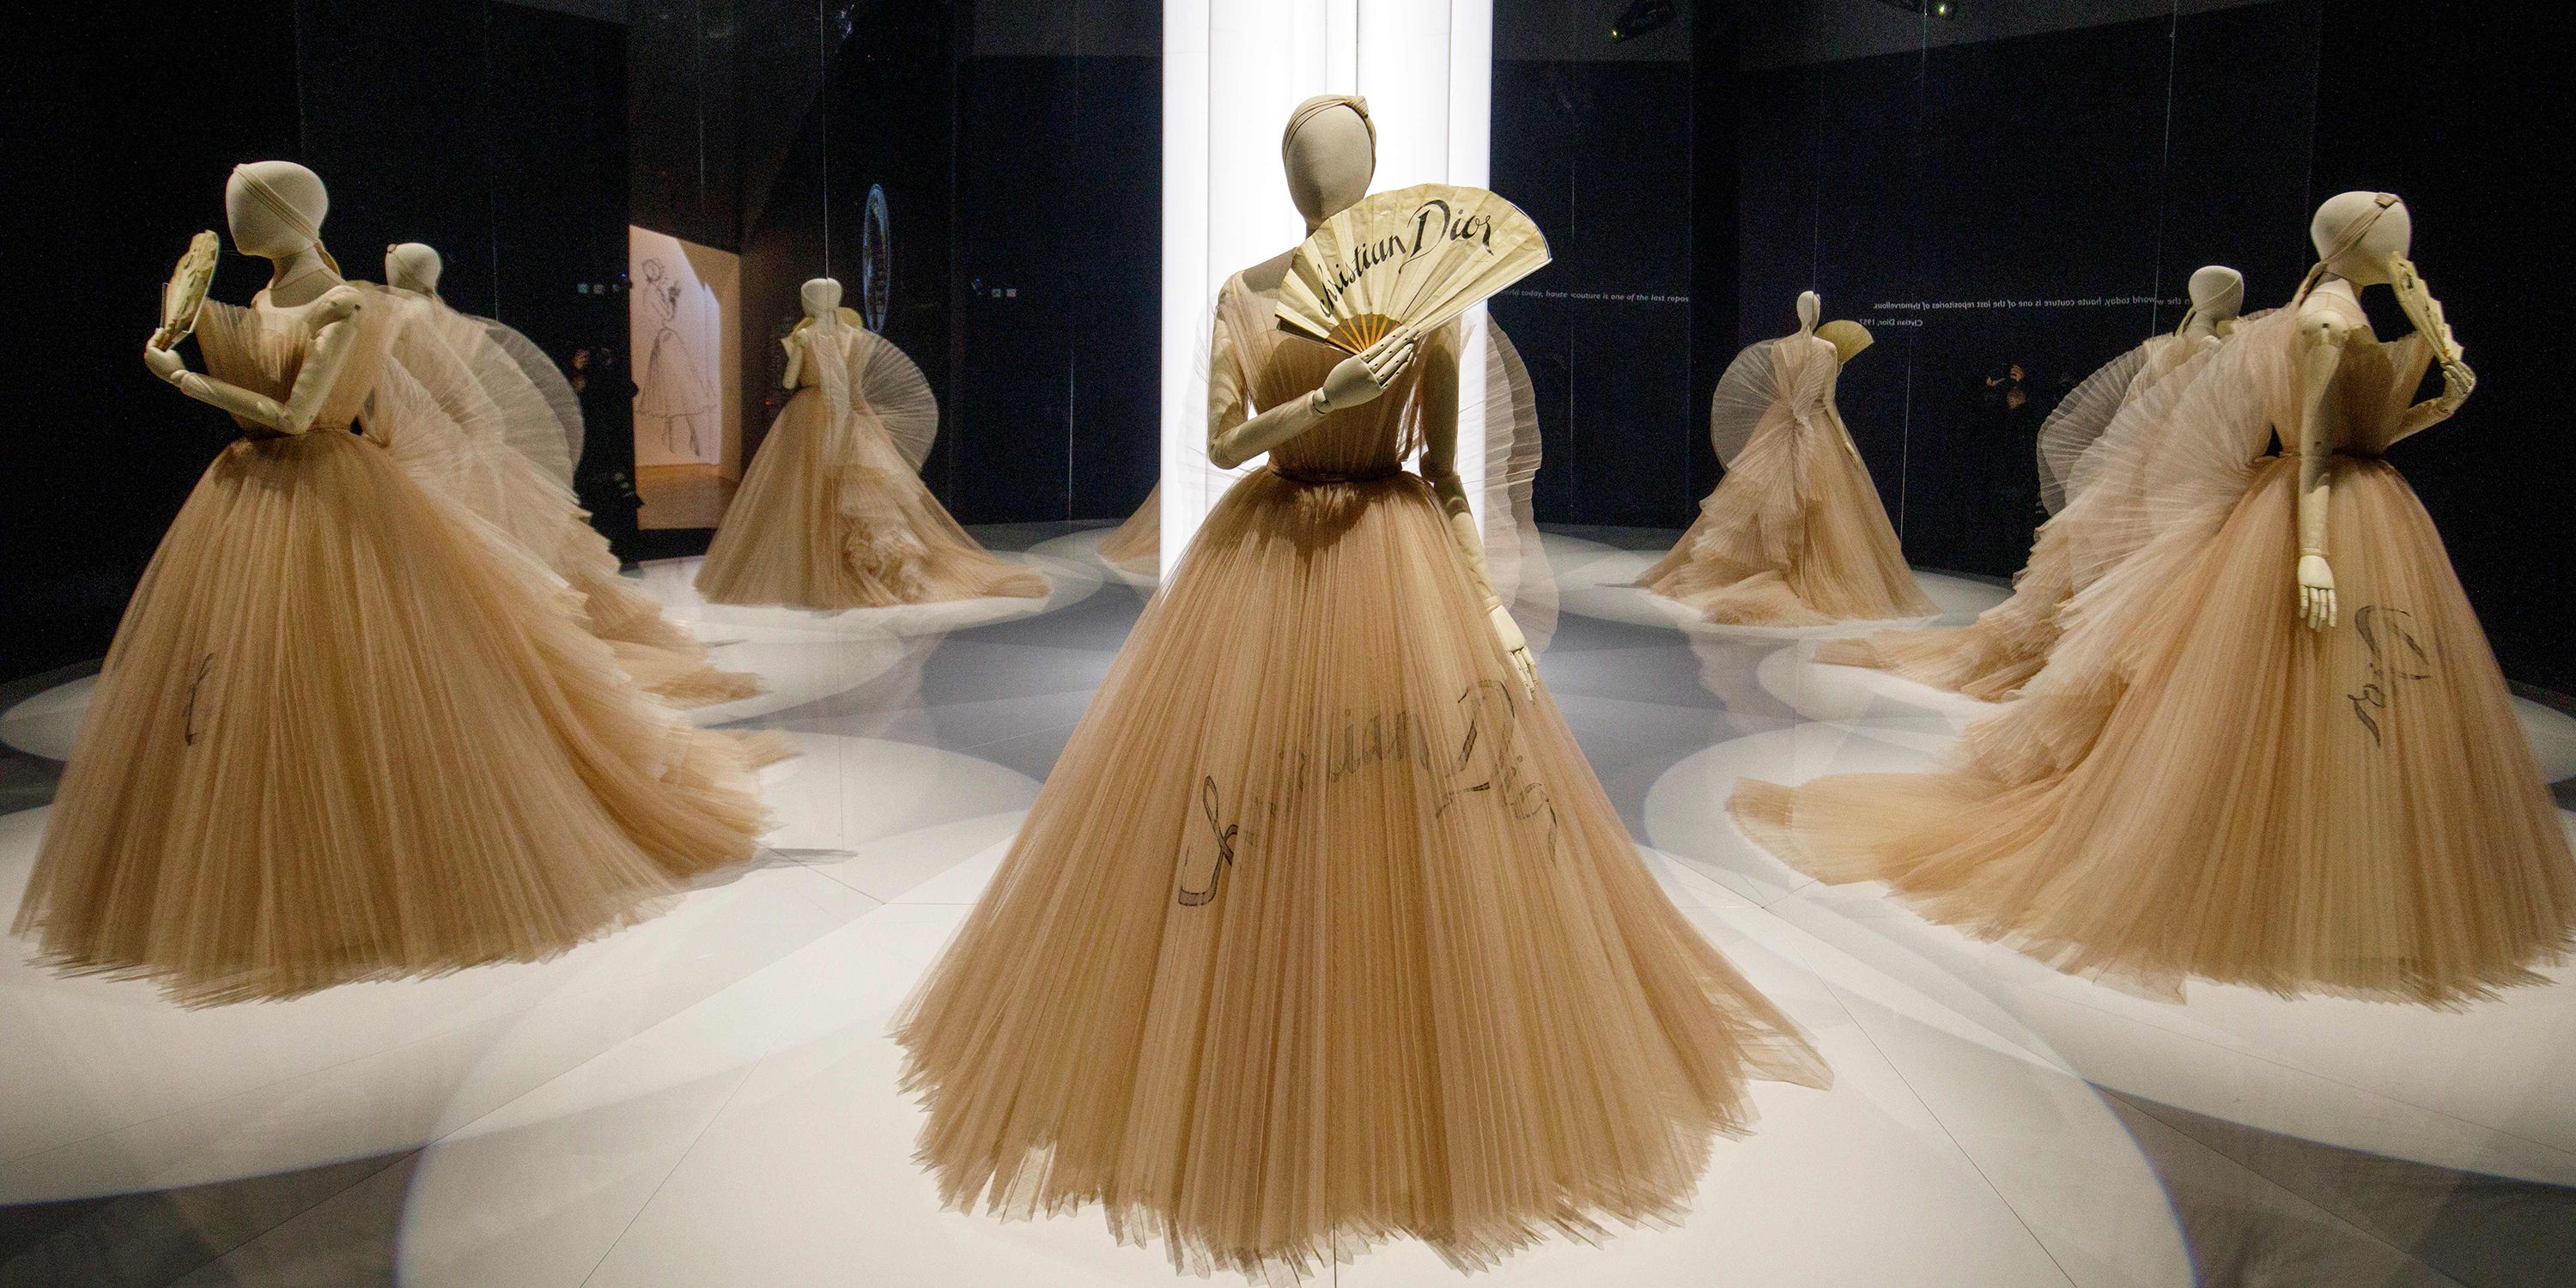 House of Dior | Ball gown | French | The Metropolitan Museum of Art